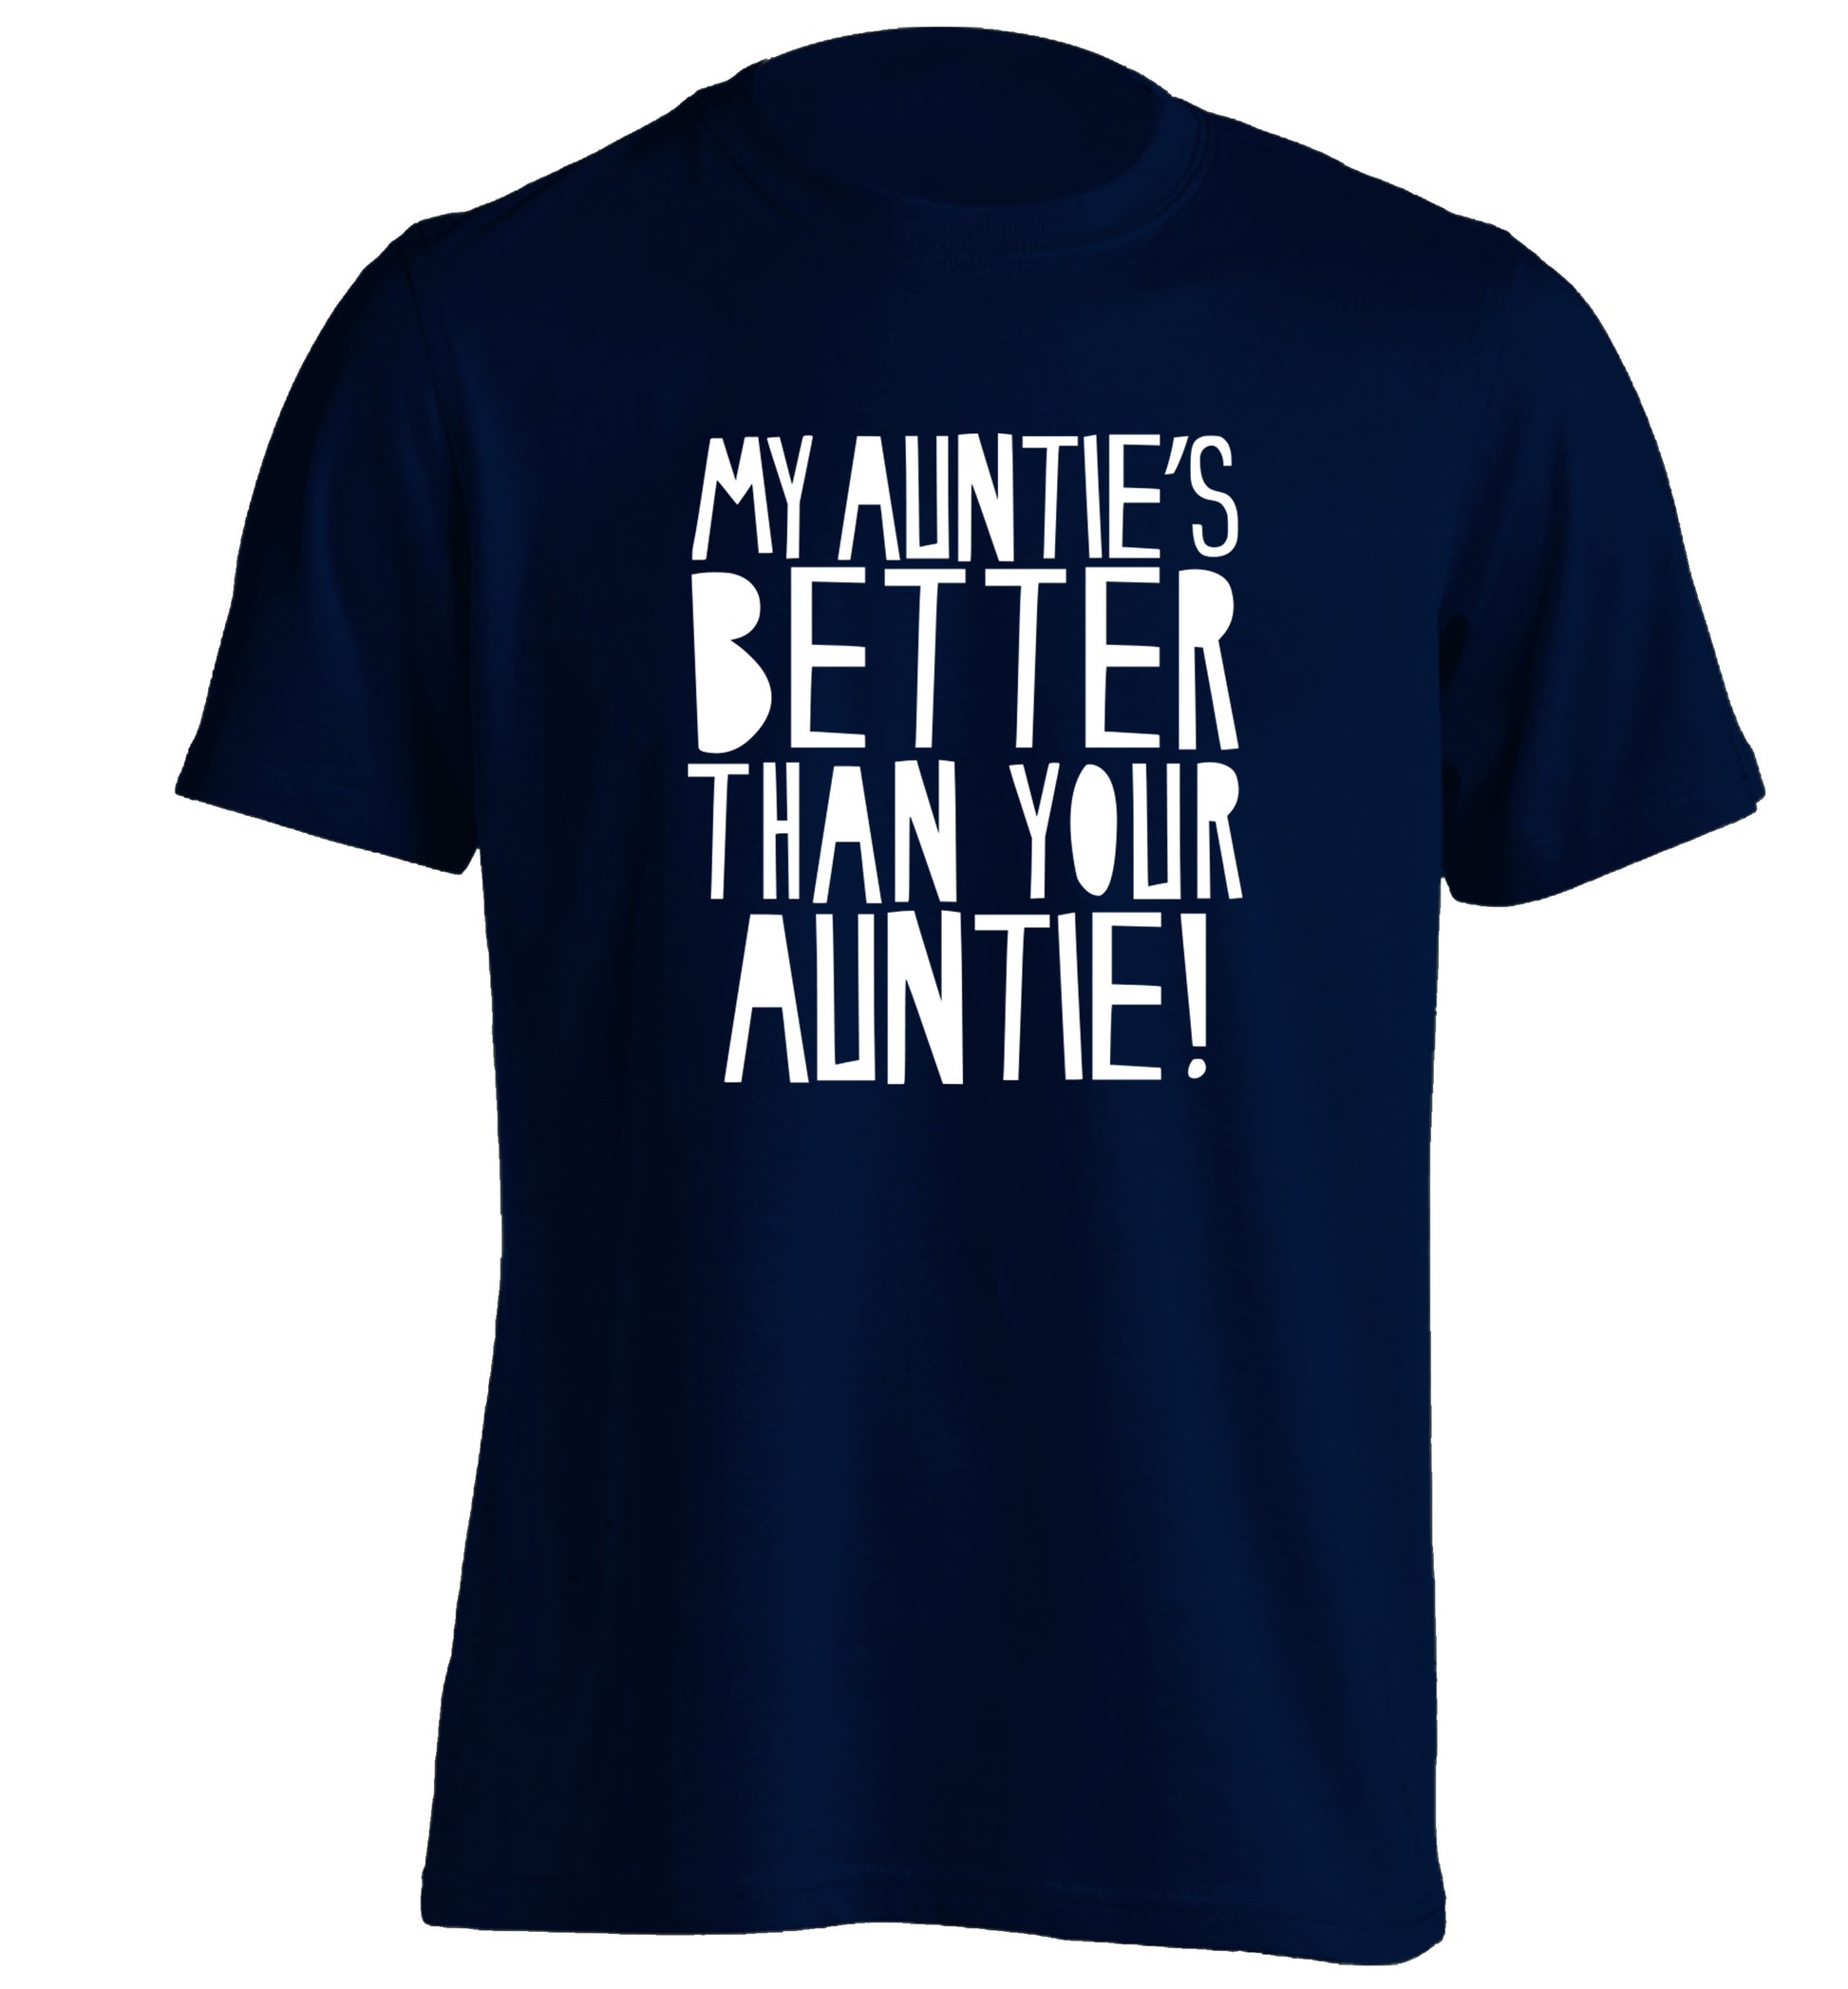 My auntie's better than your auntie adults unisex navy Tshirt 2XL